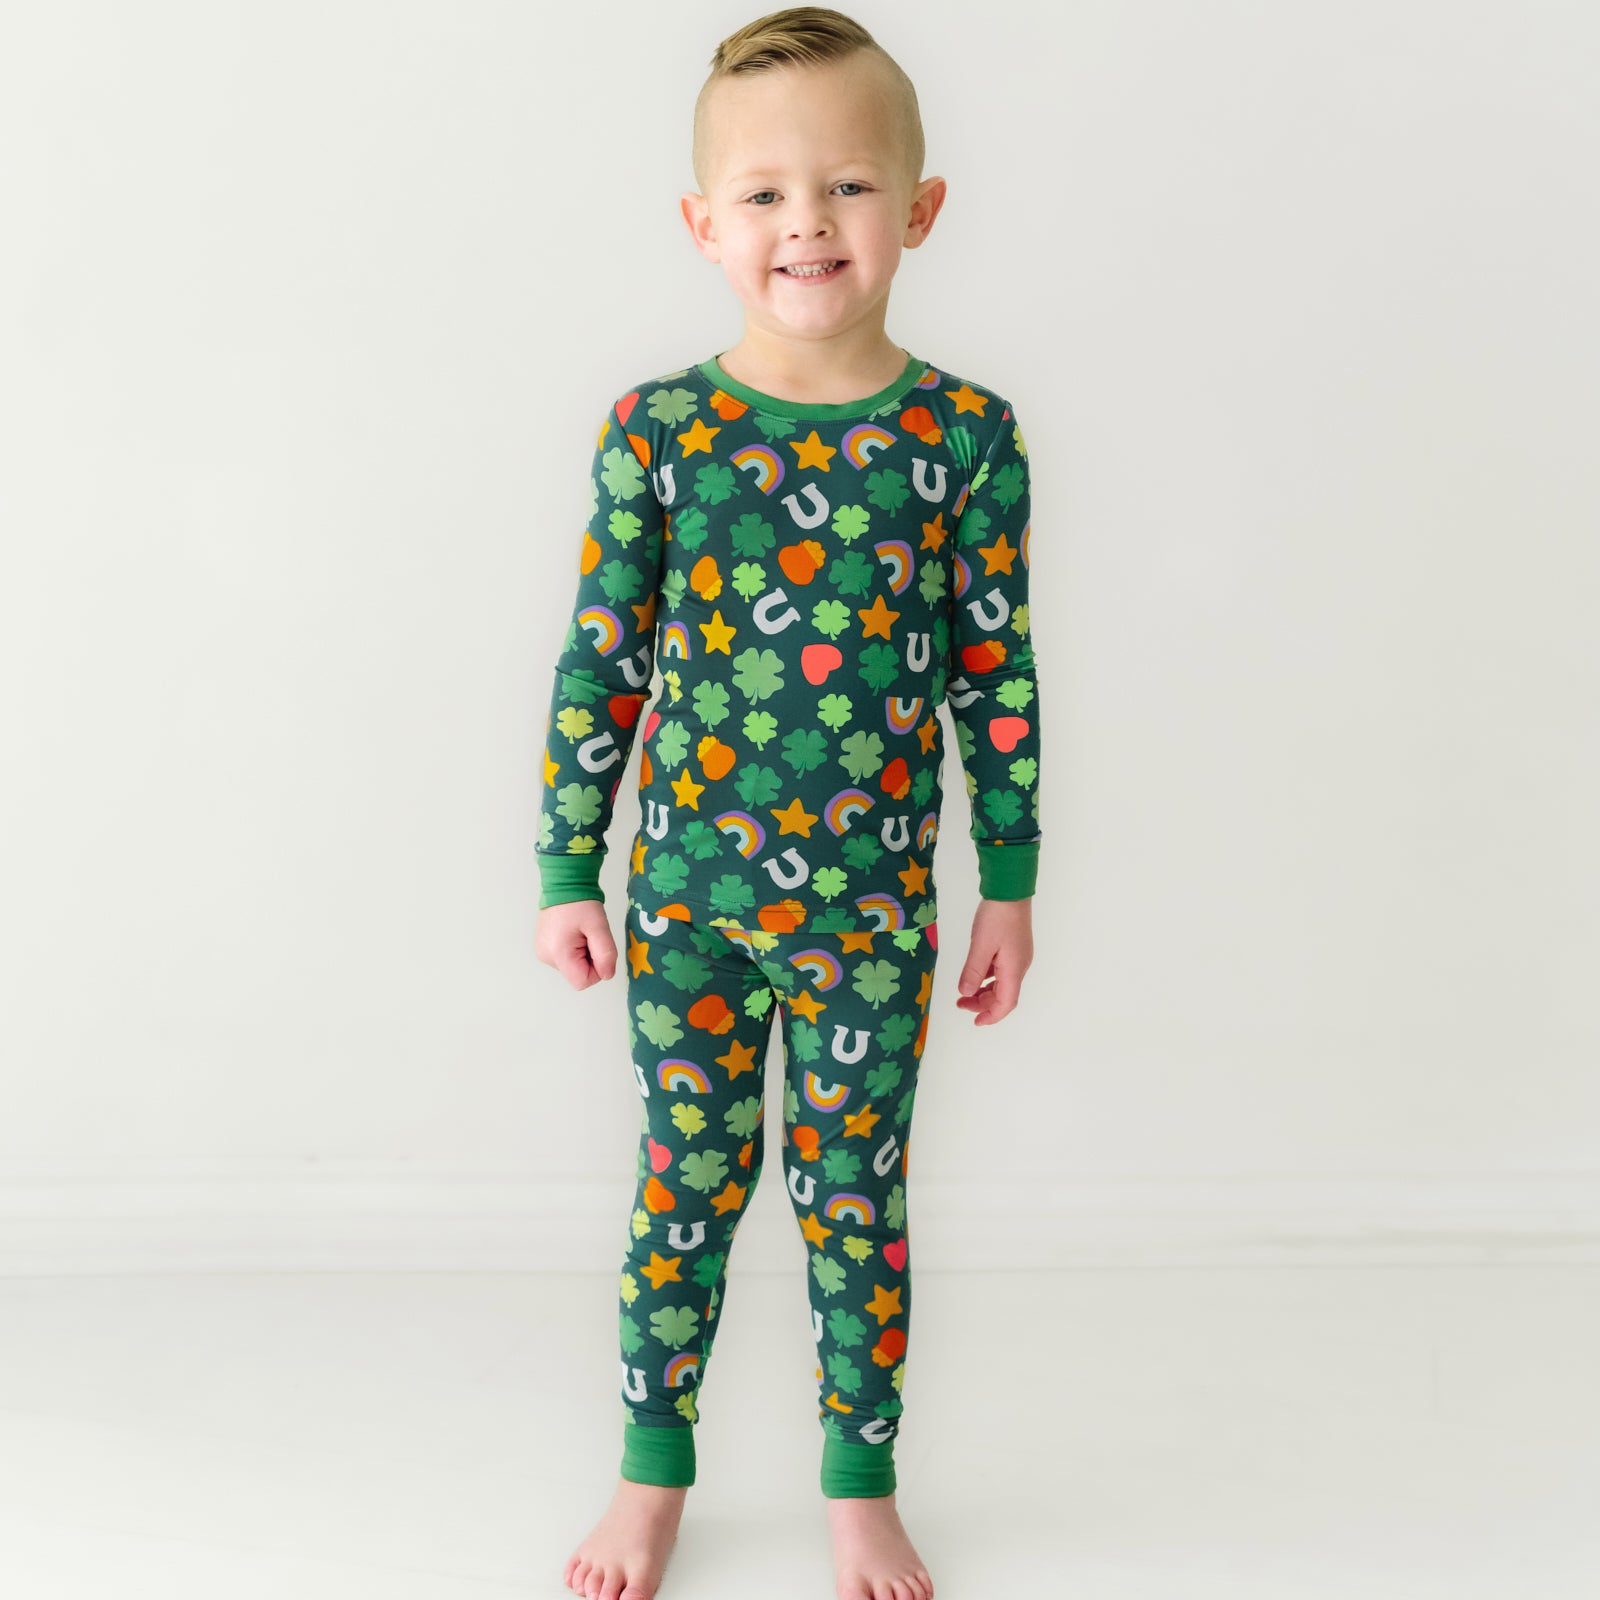 Child wearing a Lucky two piece pajama set